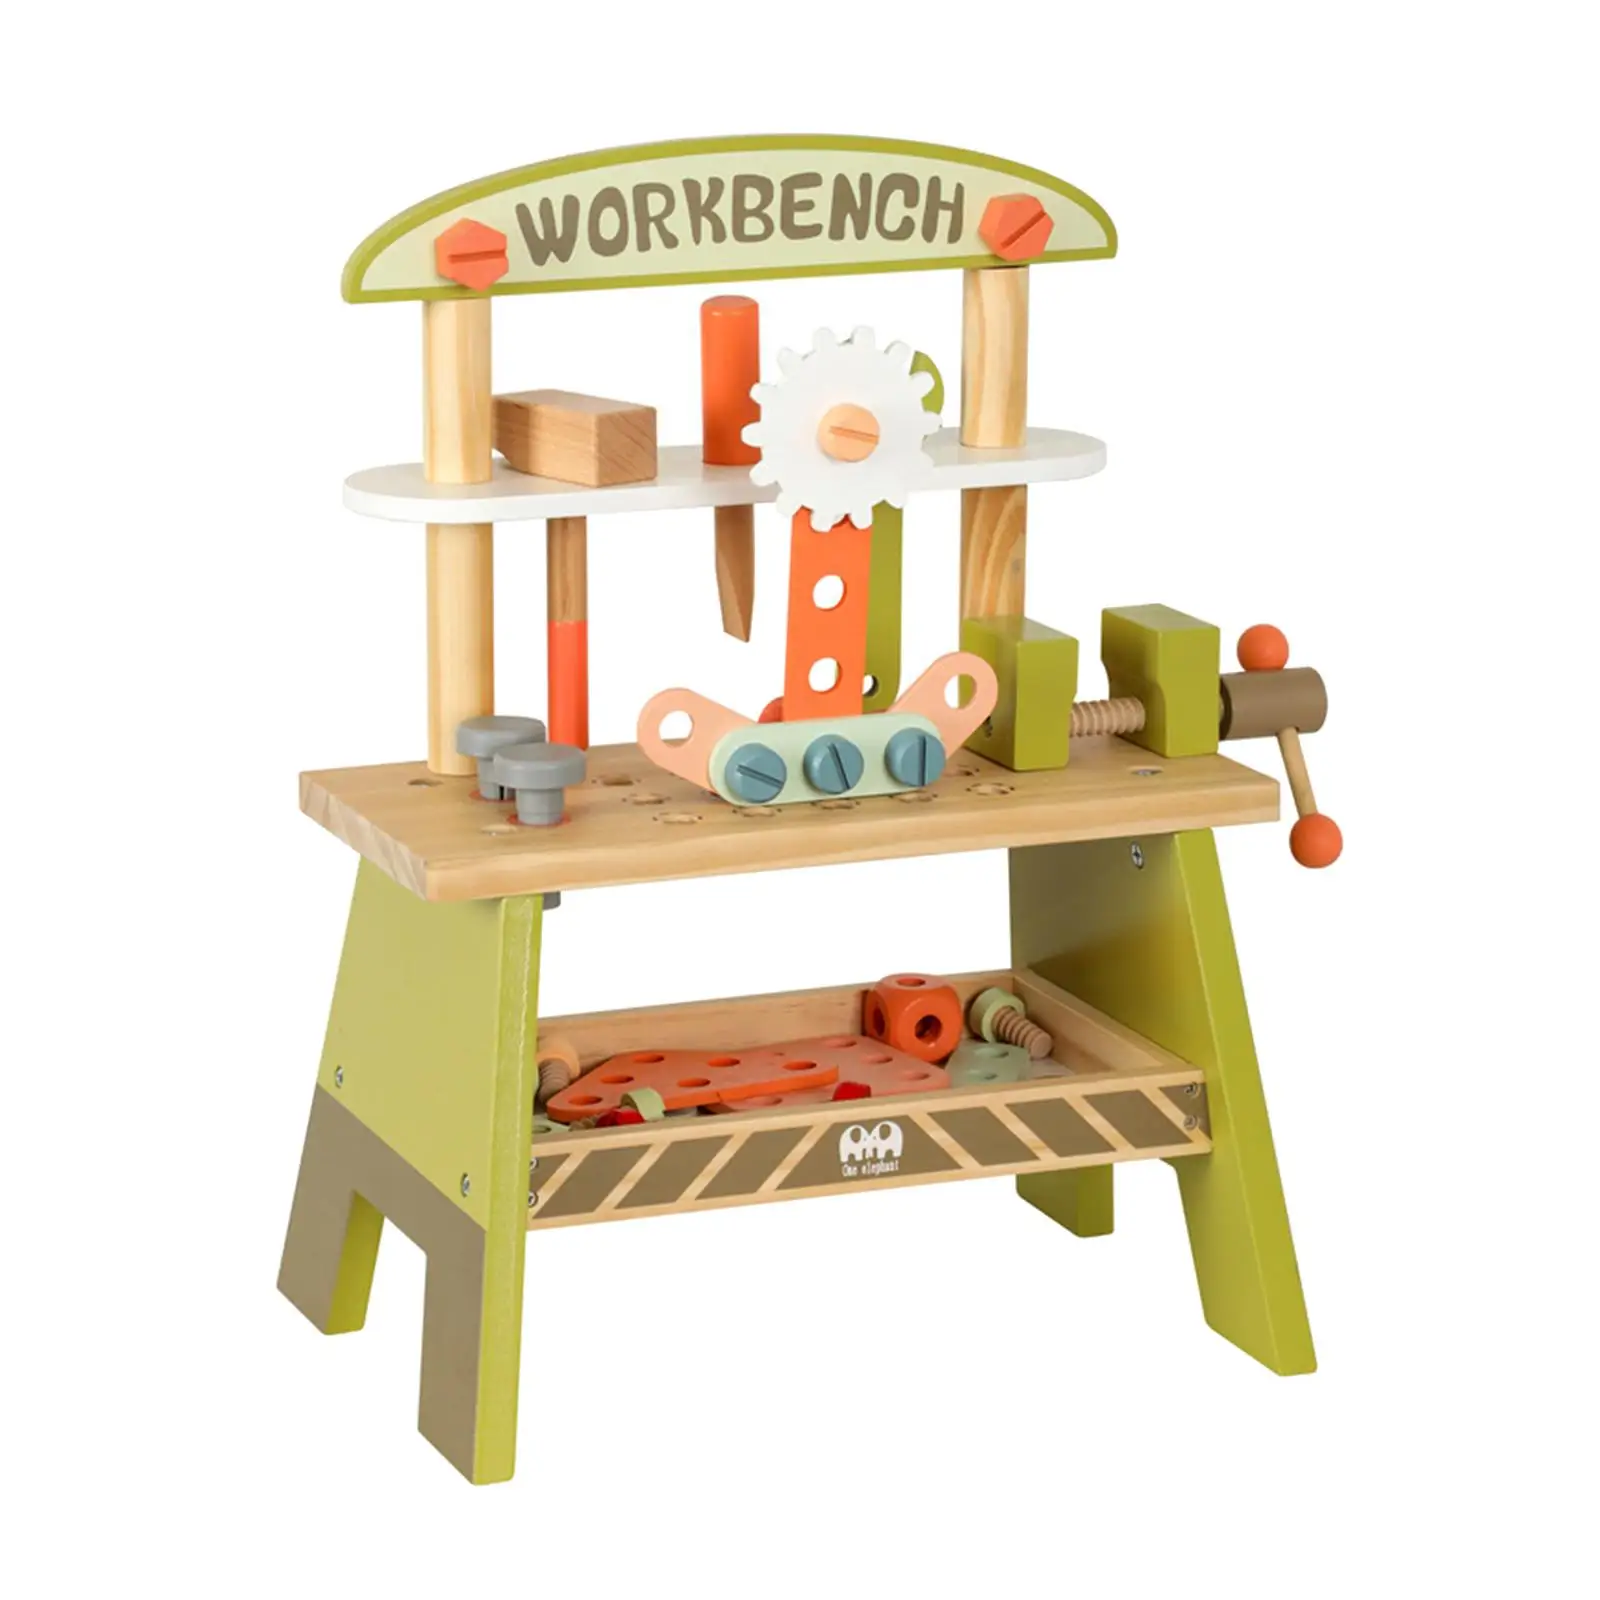 Kid`s Wooden Tool Bench Toy Playset Simulation Workshop Hand Tool Pretend Play Construction Toy for 2 3 4 5 Years Old Girls Boys